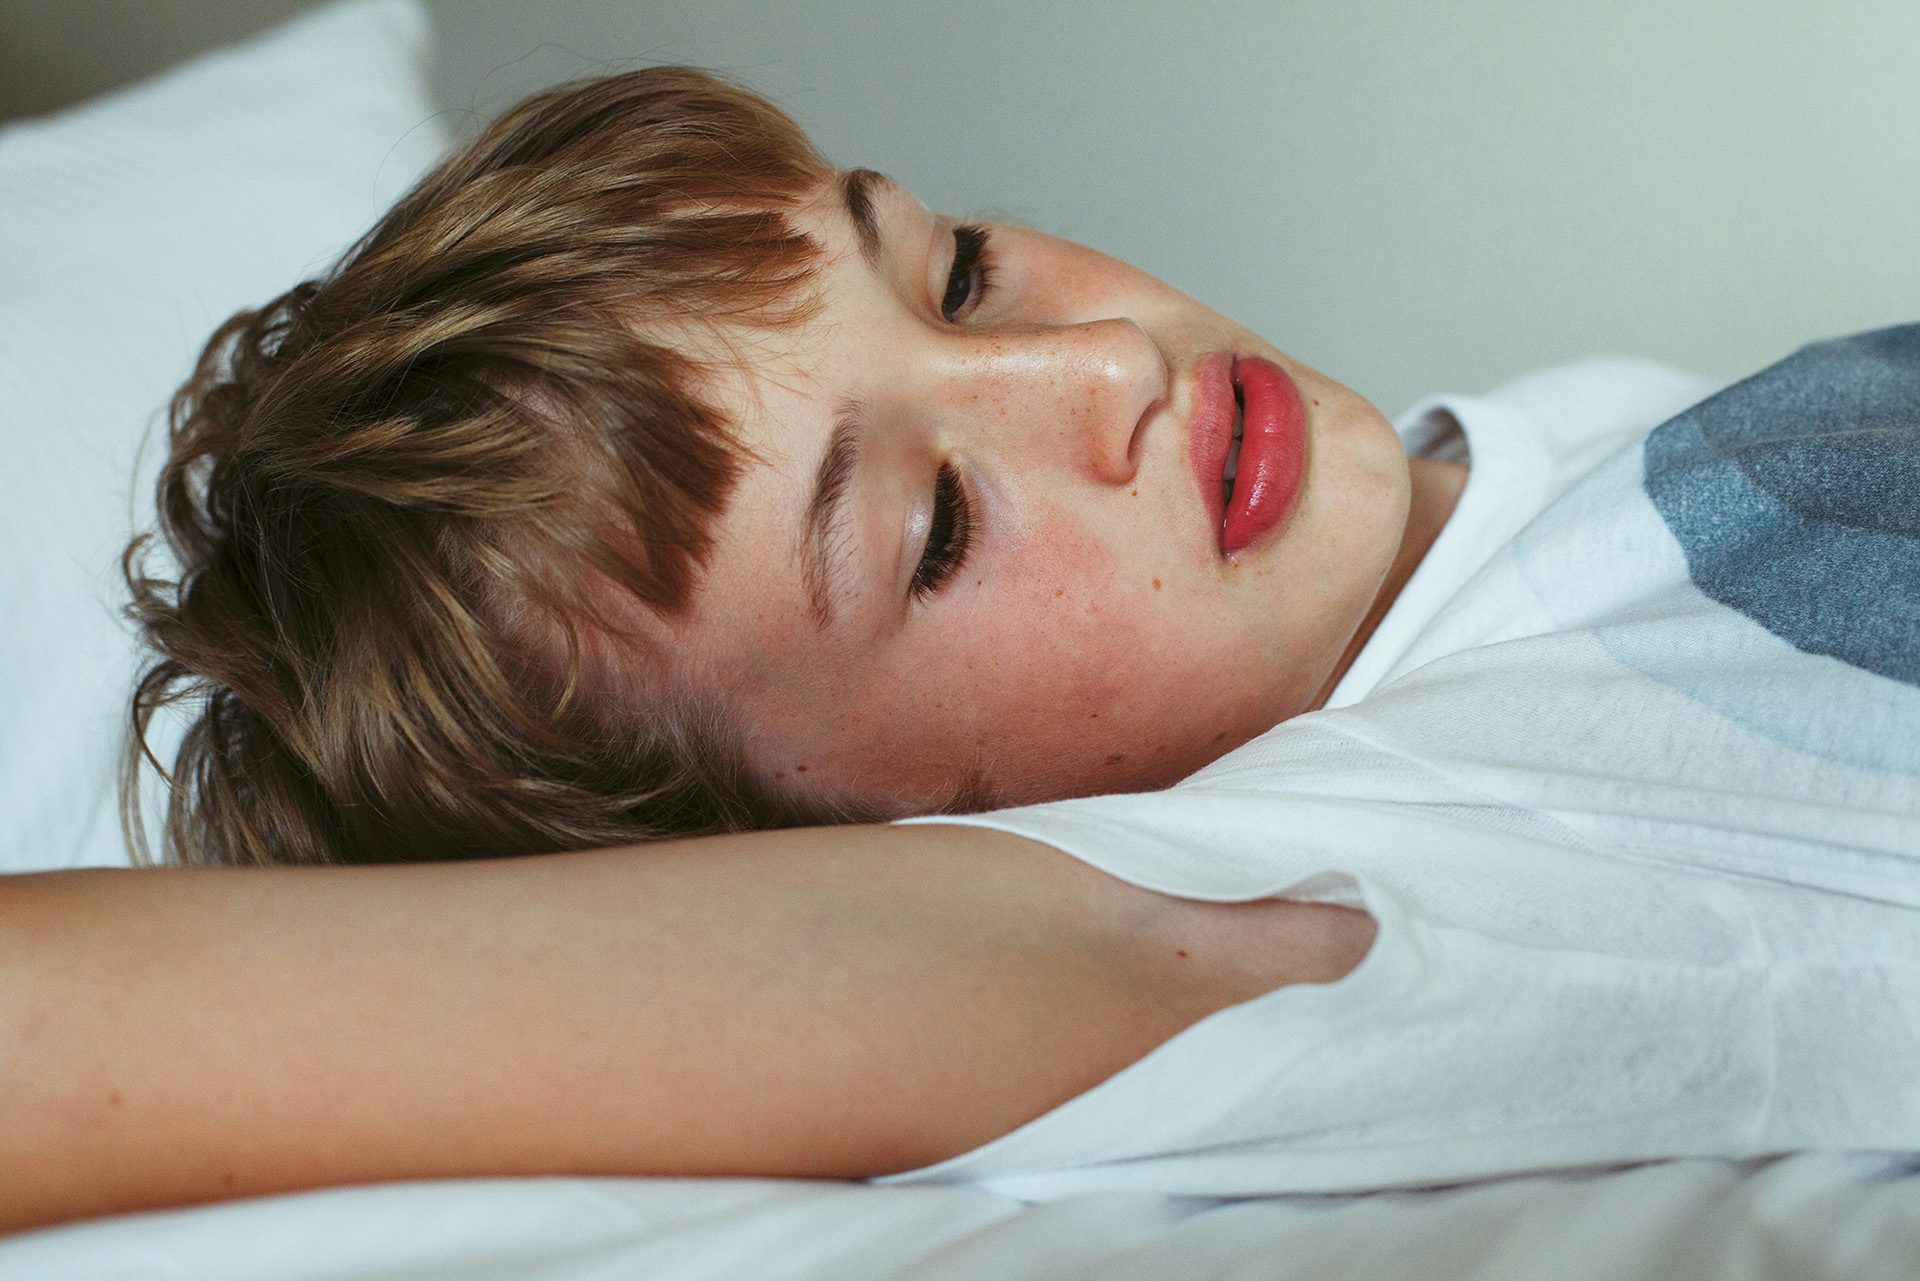 A boy with light brown hear wearing a white t-shirt while lying down